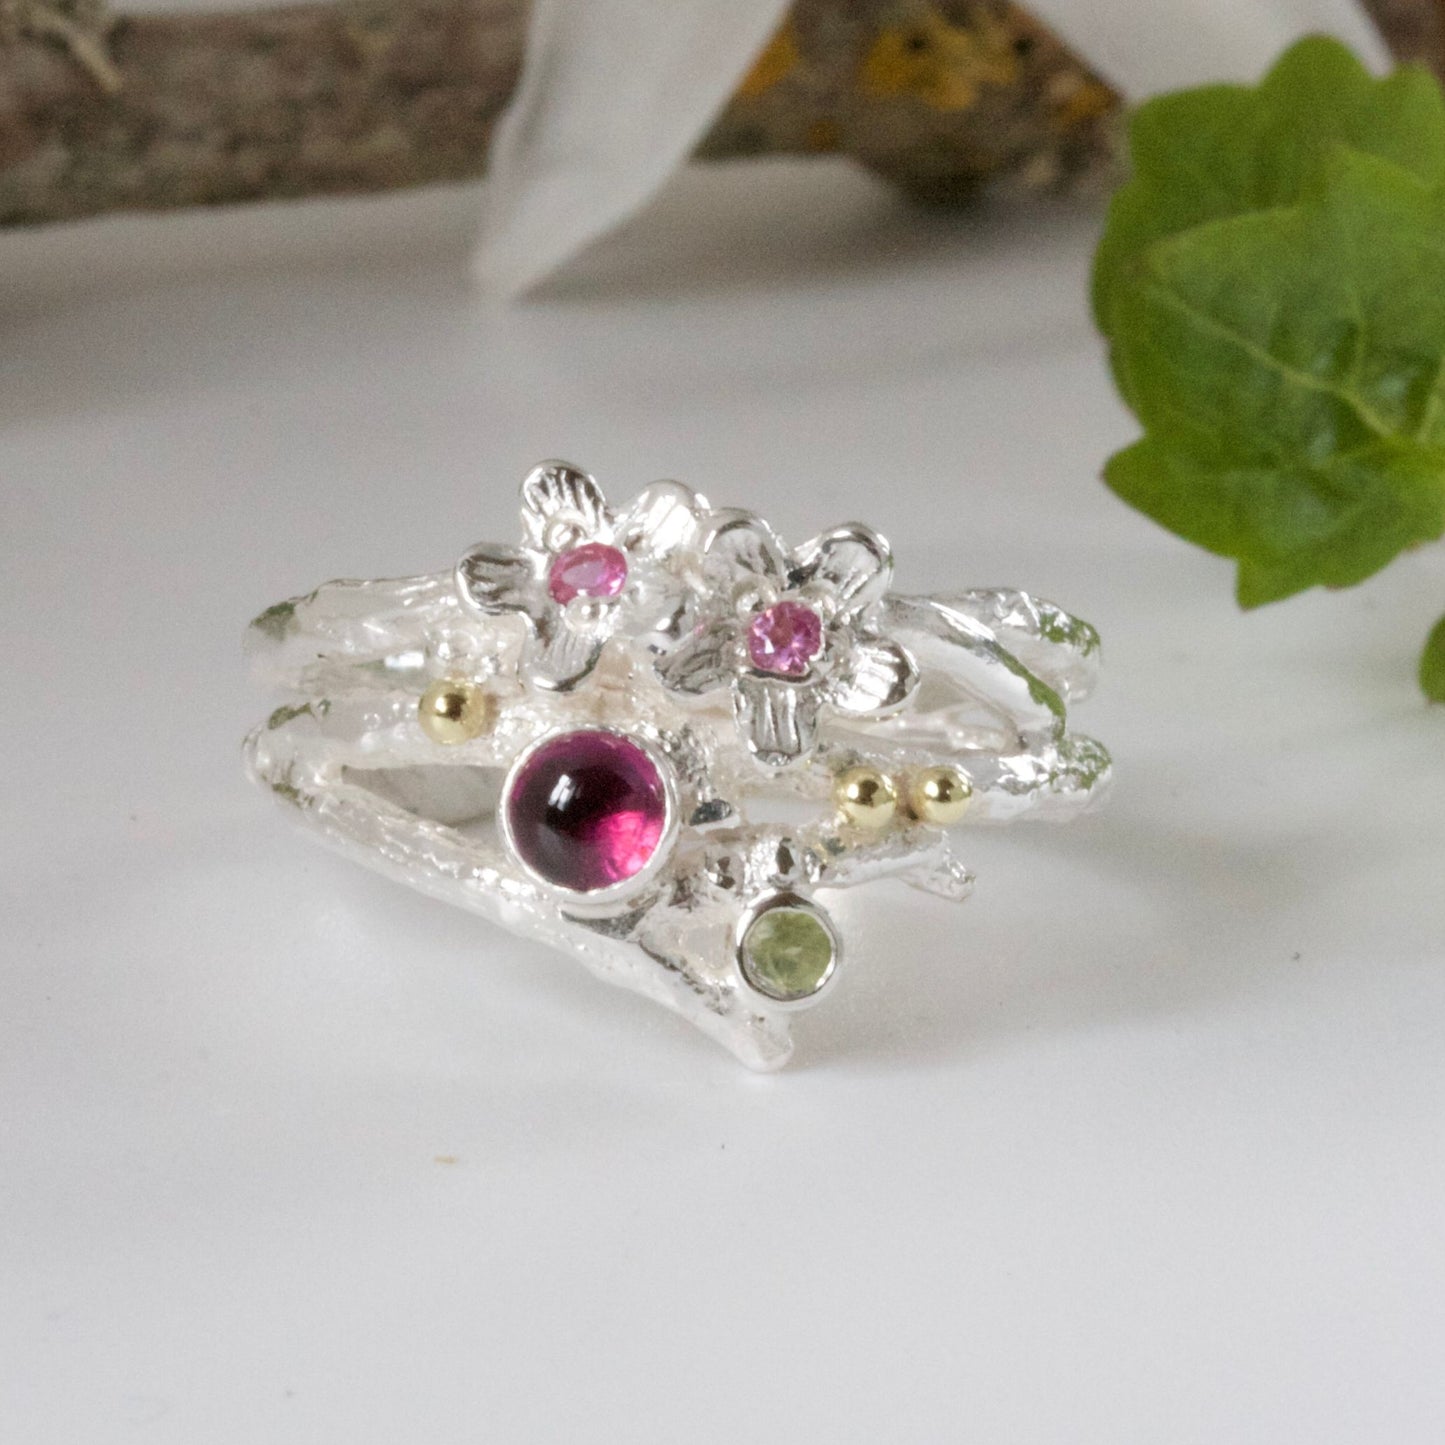 In the Pink, Enchanted Wood Twig Ring-Gemstone Mixed Metal Ring-Pink Sapphire